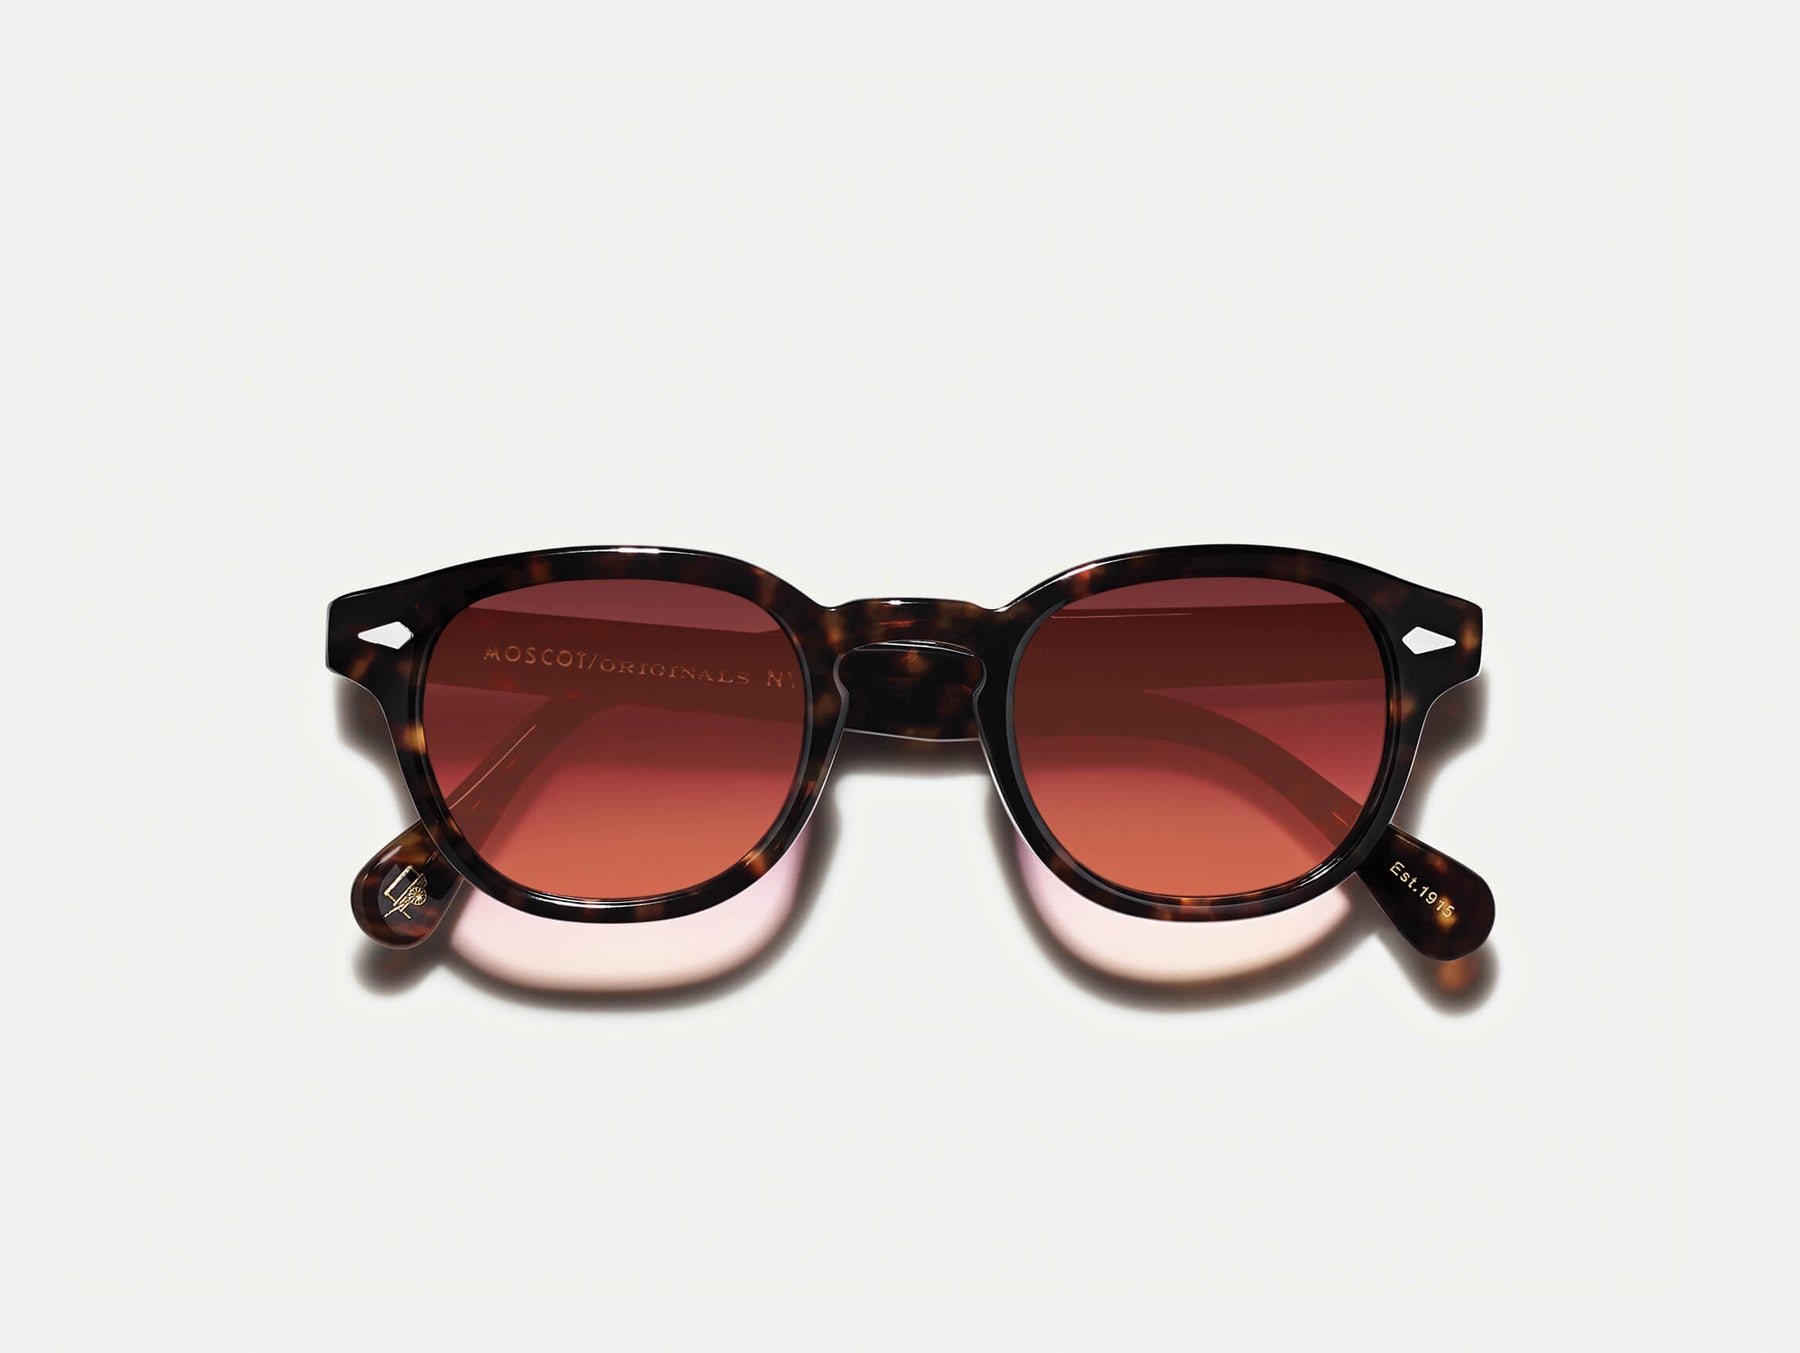 The LEMTOSH Tortoise with Cabernet Tinted Lenses